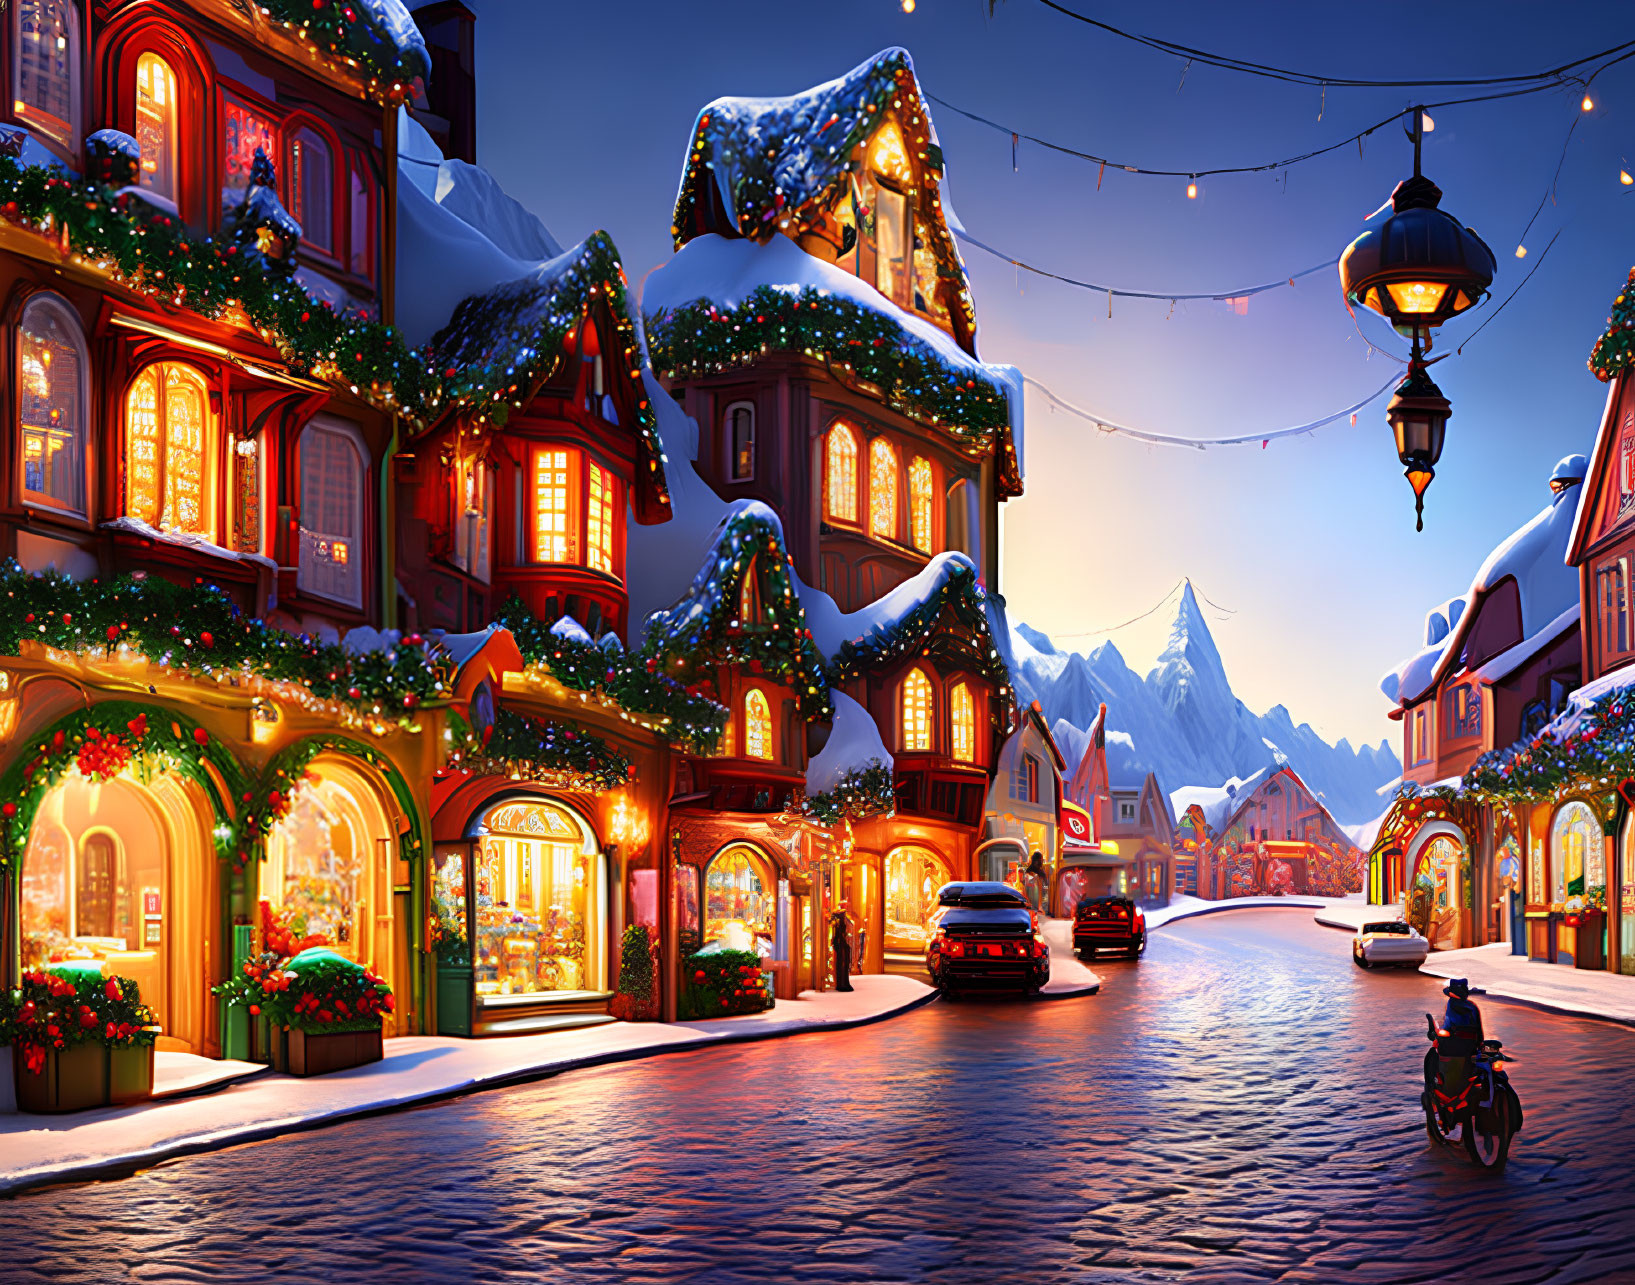 Snow-covered winter village scene at dusk with festive decorations and mountain backdrop